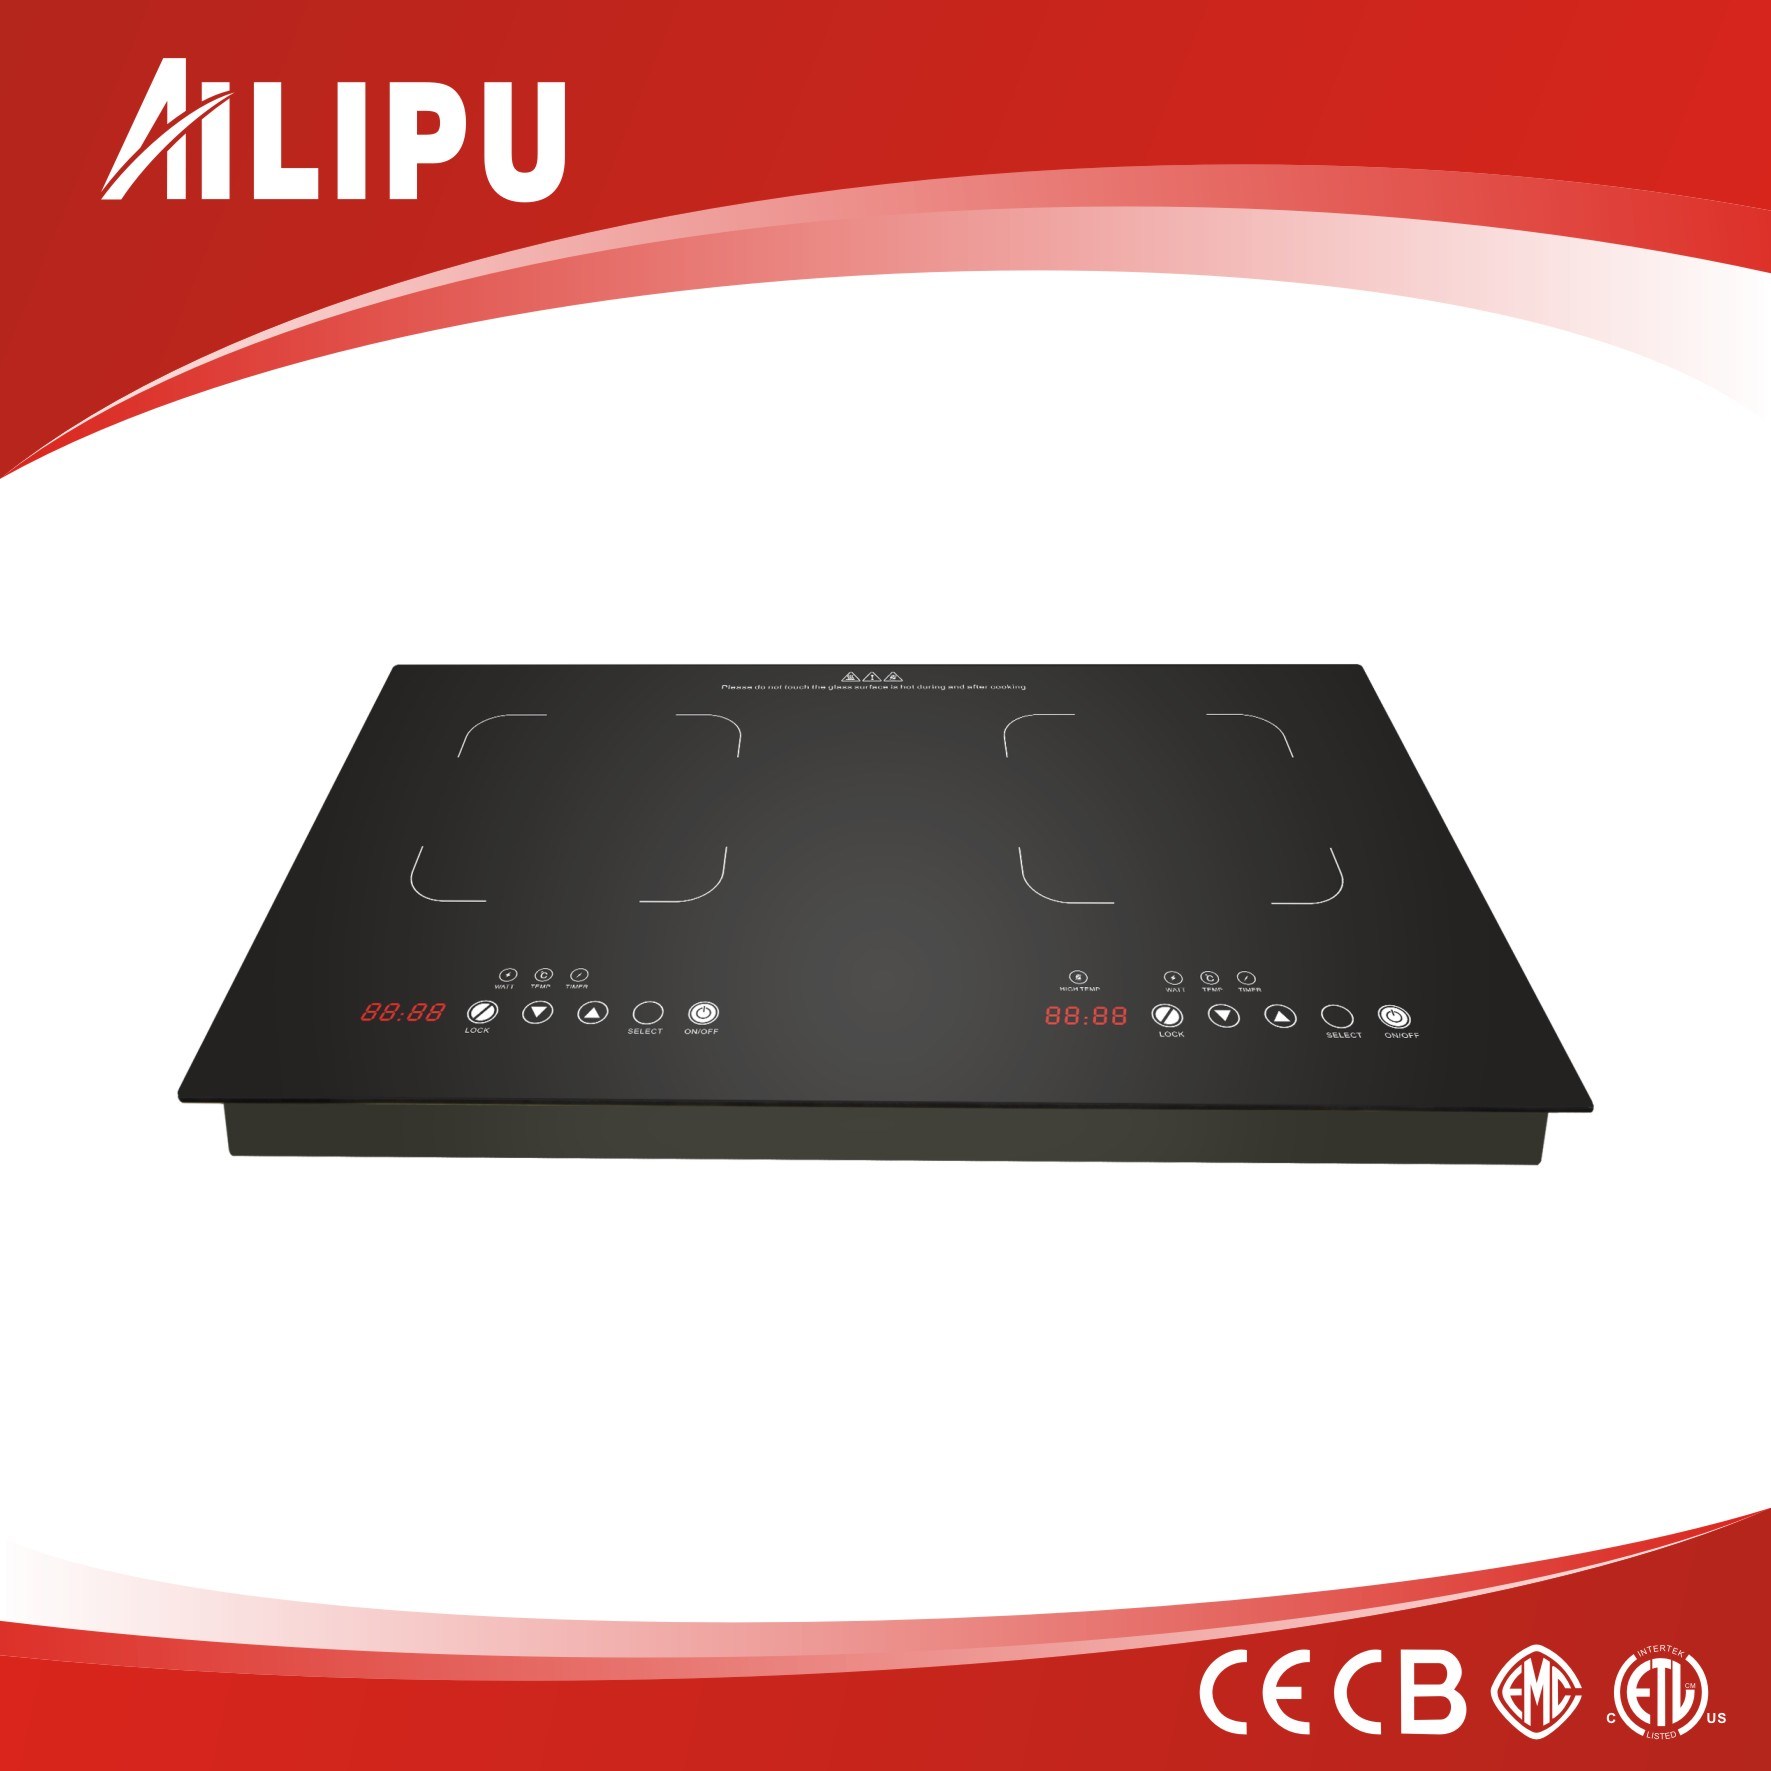 Multi-Functional and Safe Touch Control Double Induction Cooker with Metal Housing